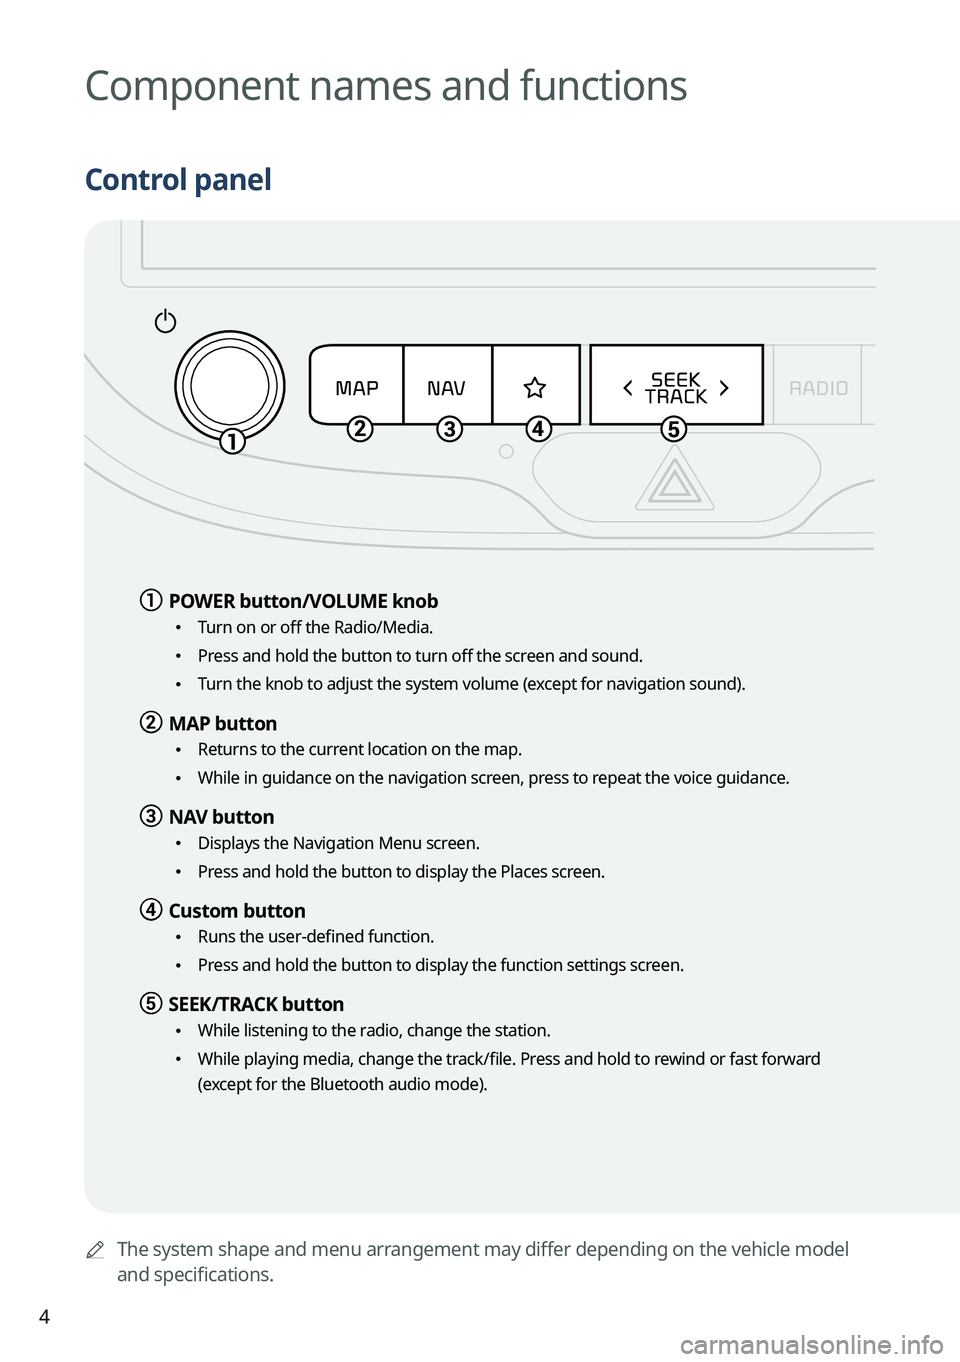 KIA SOUL 2023  Quick Reference Guide 4
	AThe system shape and menu arrangement may differ depending on the vehicle model 
and specifications.
Component names and functions
Control panel
a a POWER  button/VOLUME  knob
 •
Turn on or off 